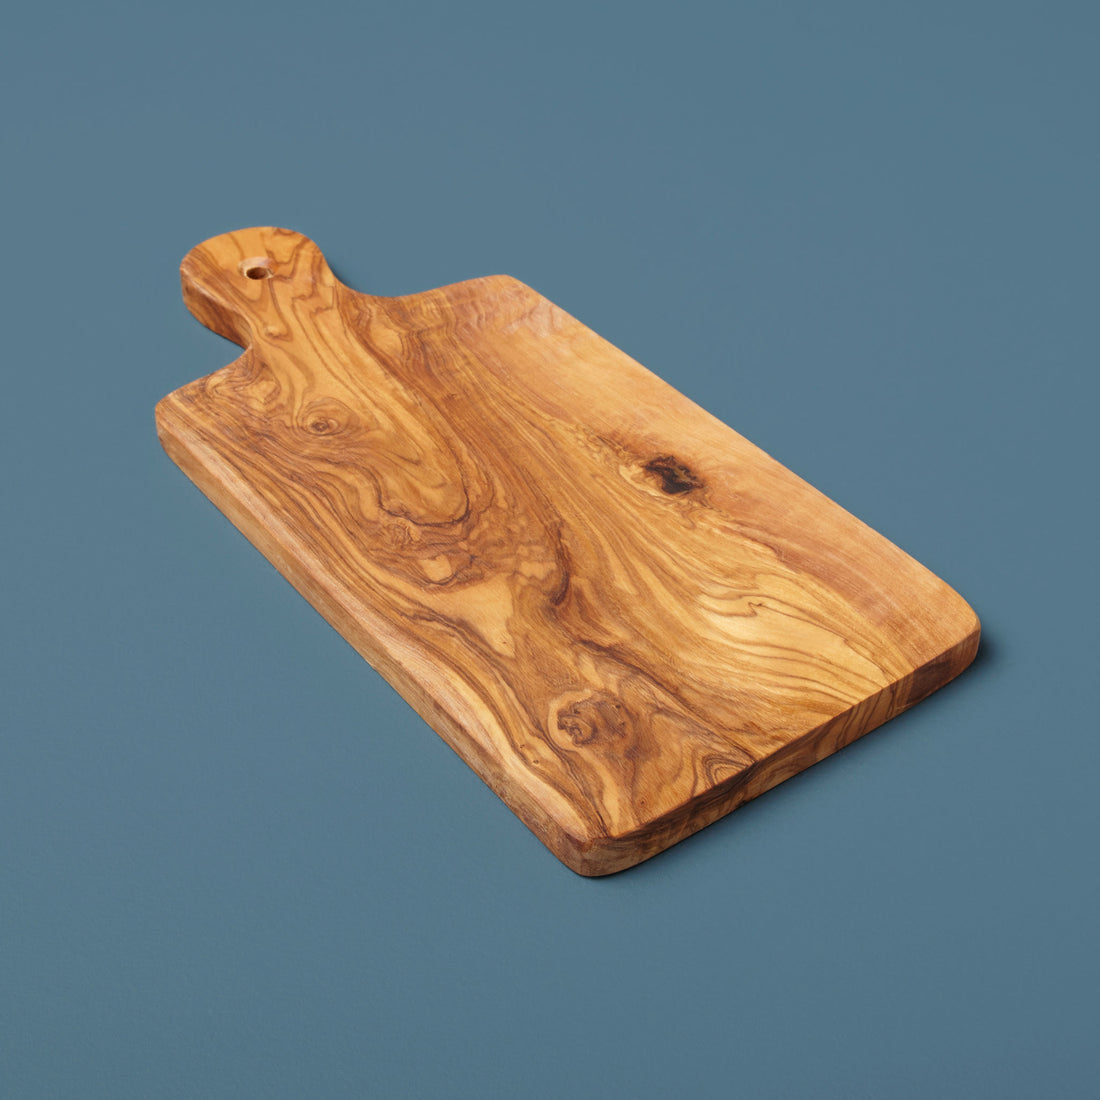 https://cdn.shopify.com/s/files/1/0376/0920/9900/products/Be-Home_Mini-Olive-Wood-Board_50-61.jpg?v=1606349537&width=1100